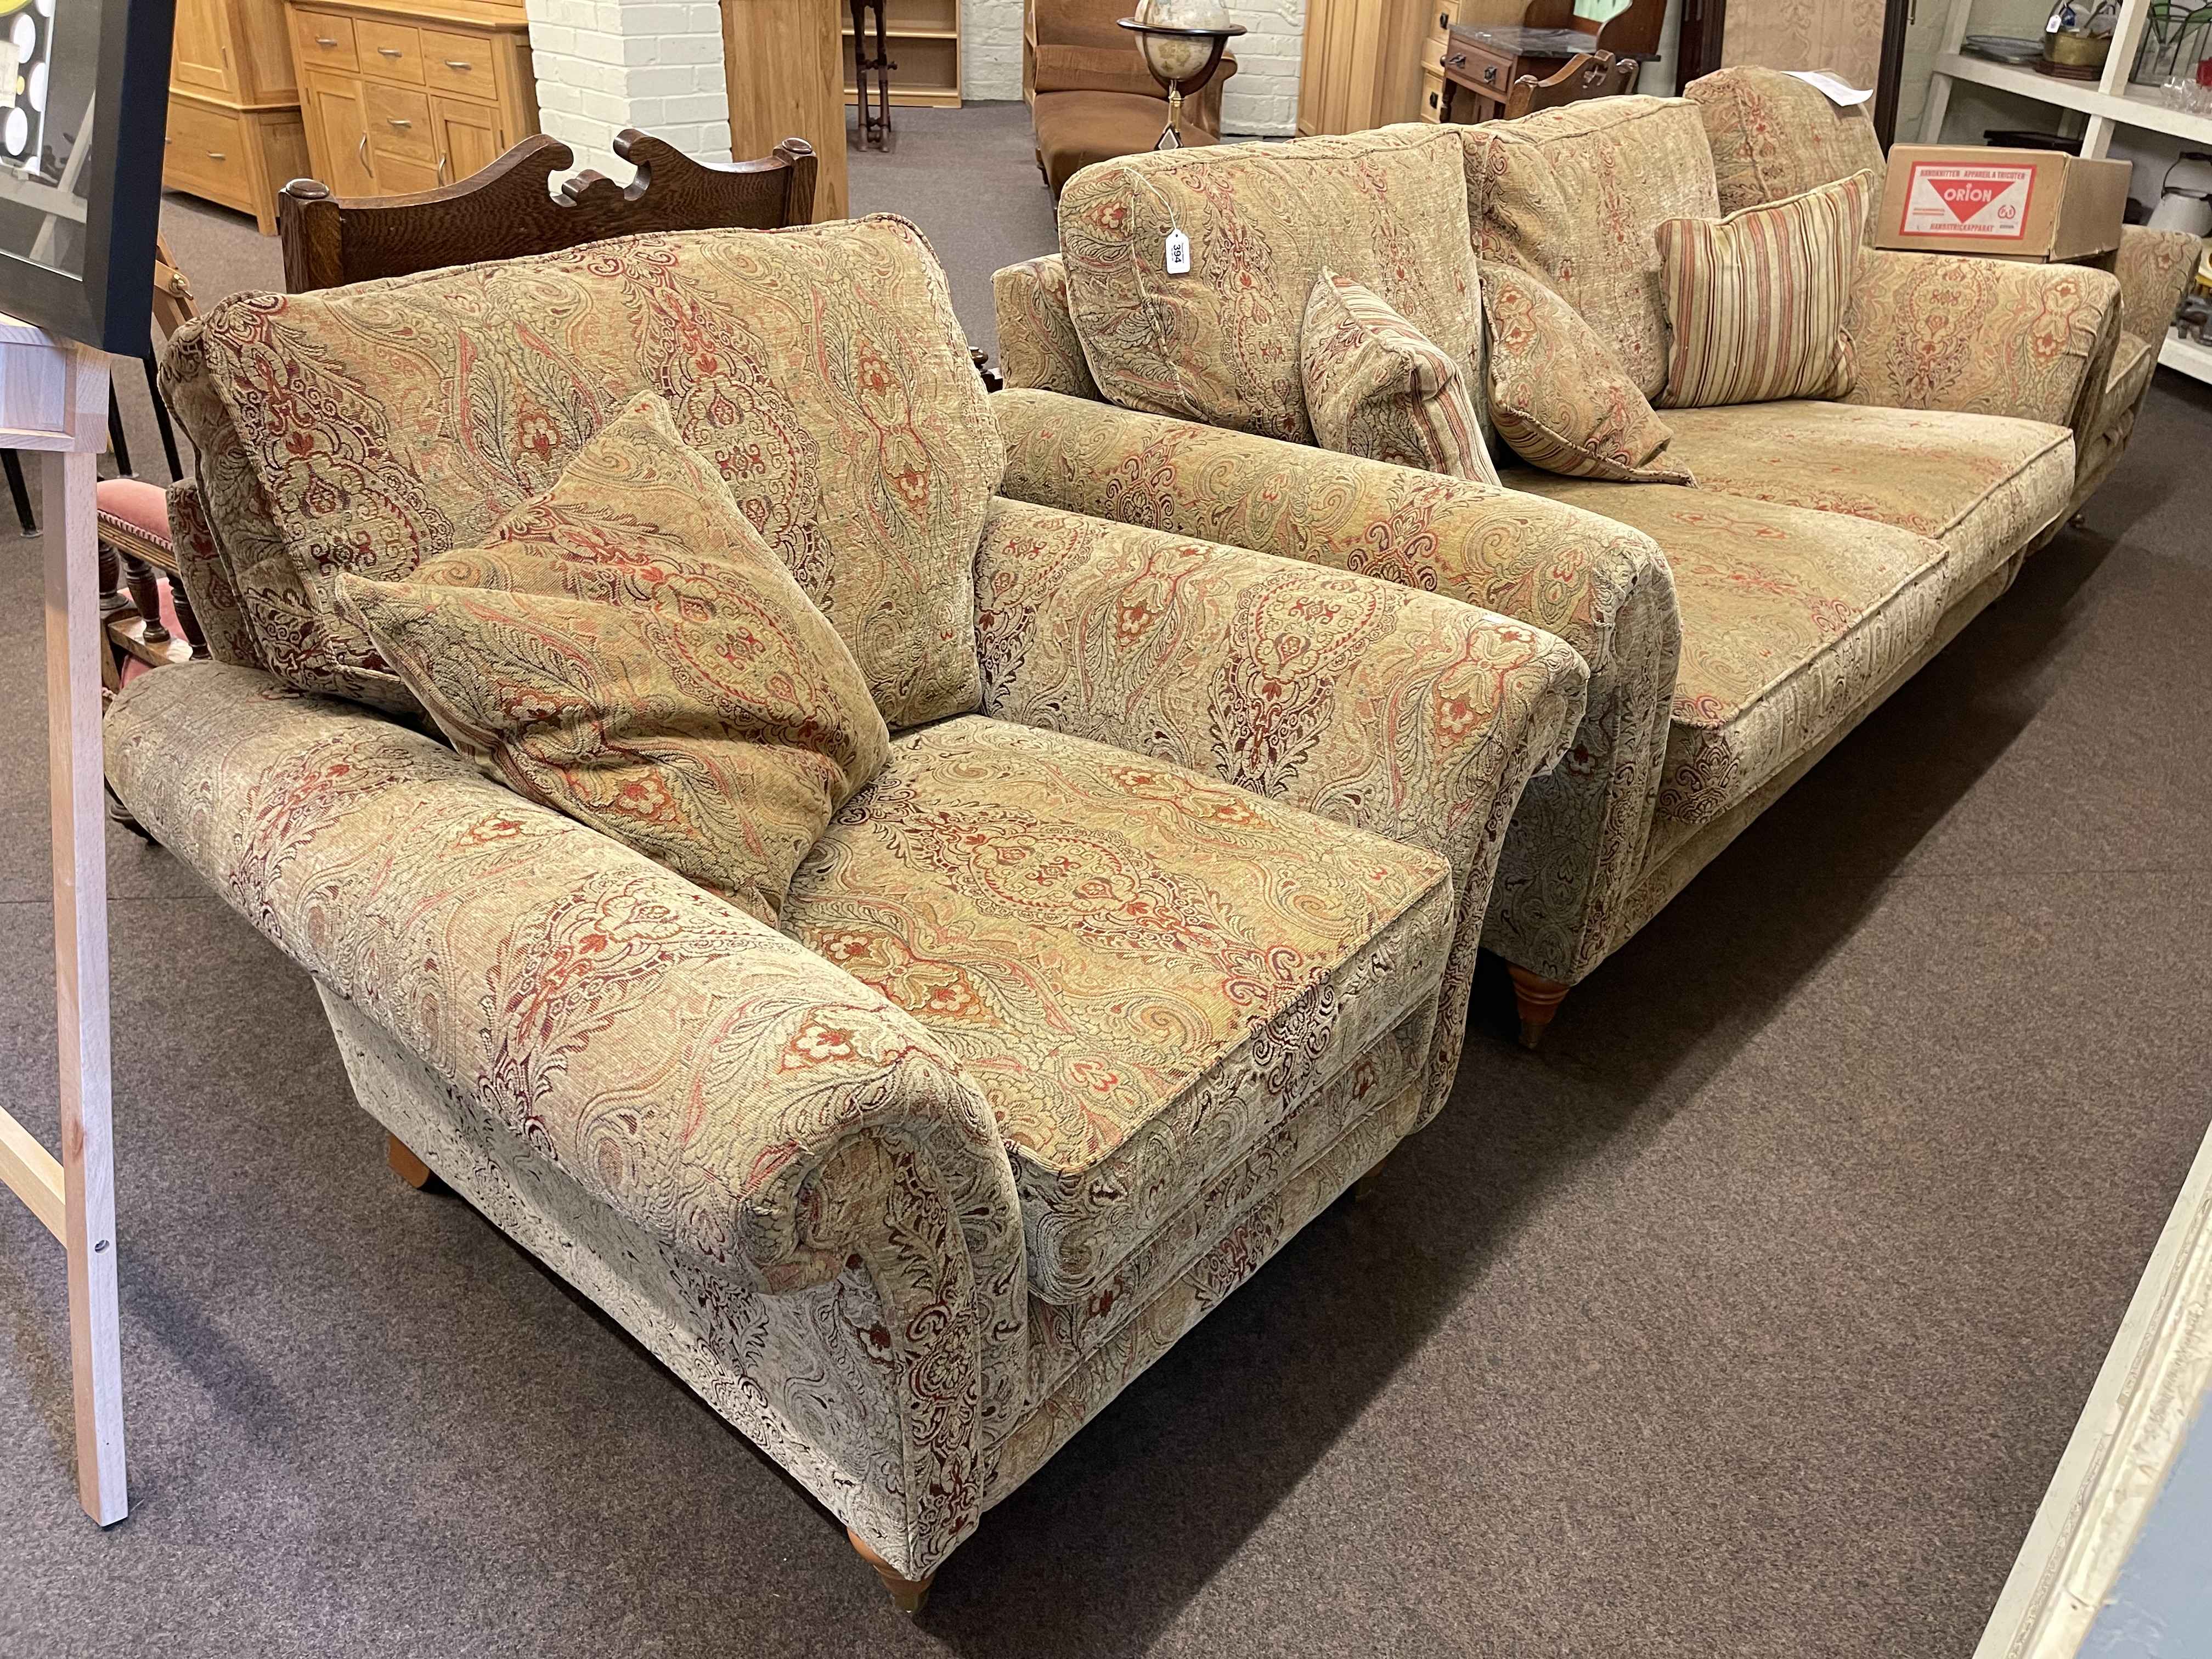 Parker Knoll three piece lounge suite in classical fabric.